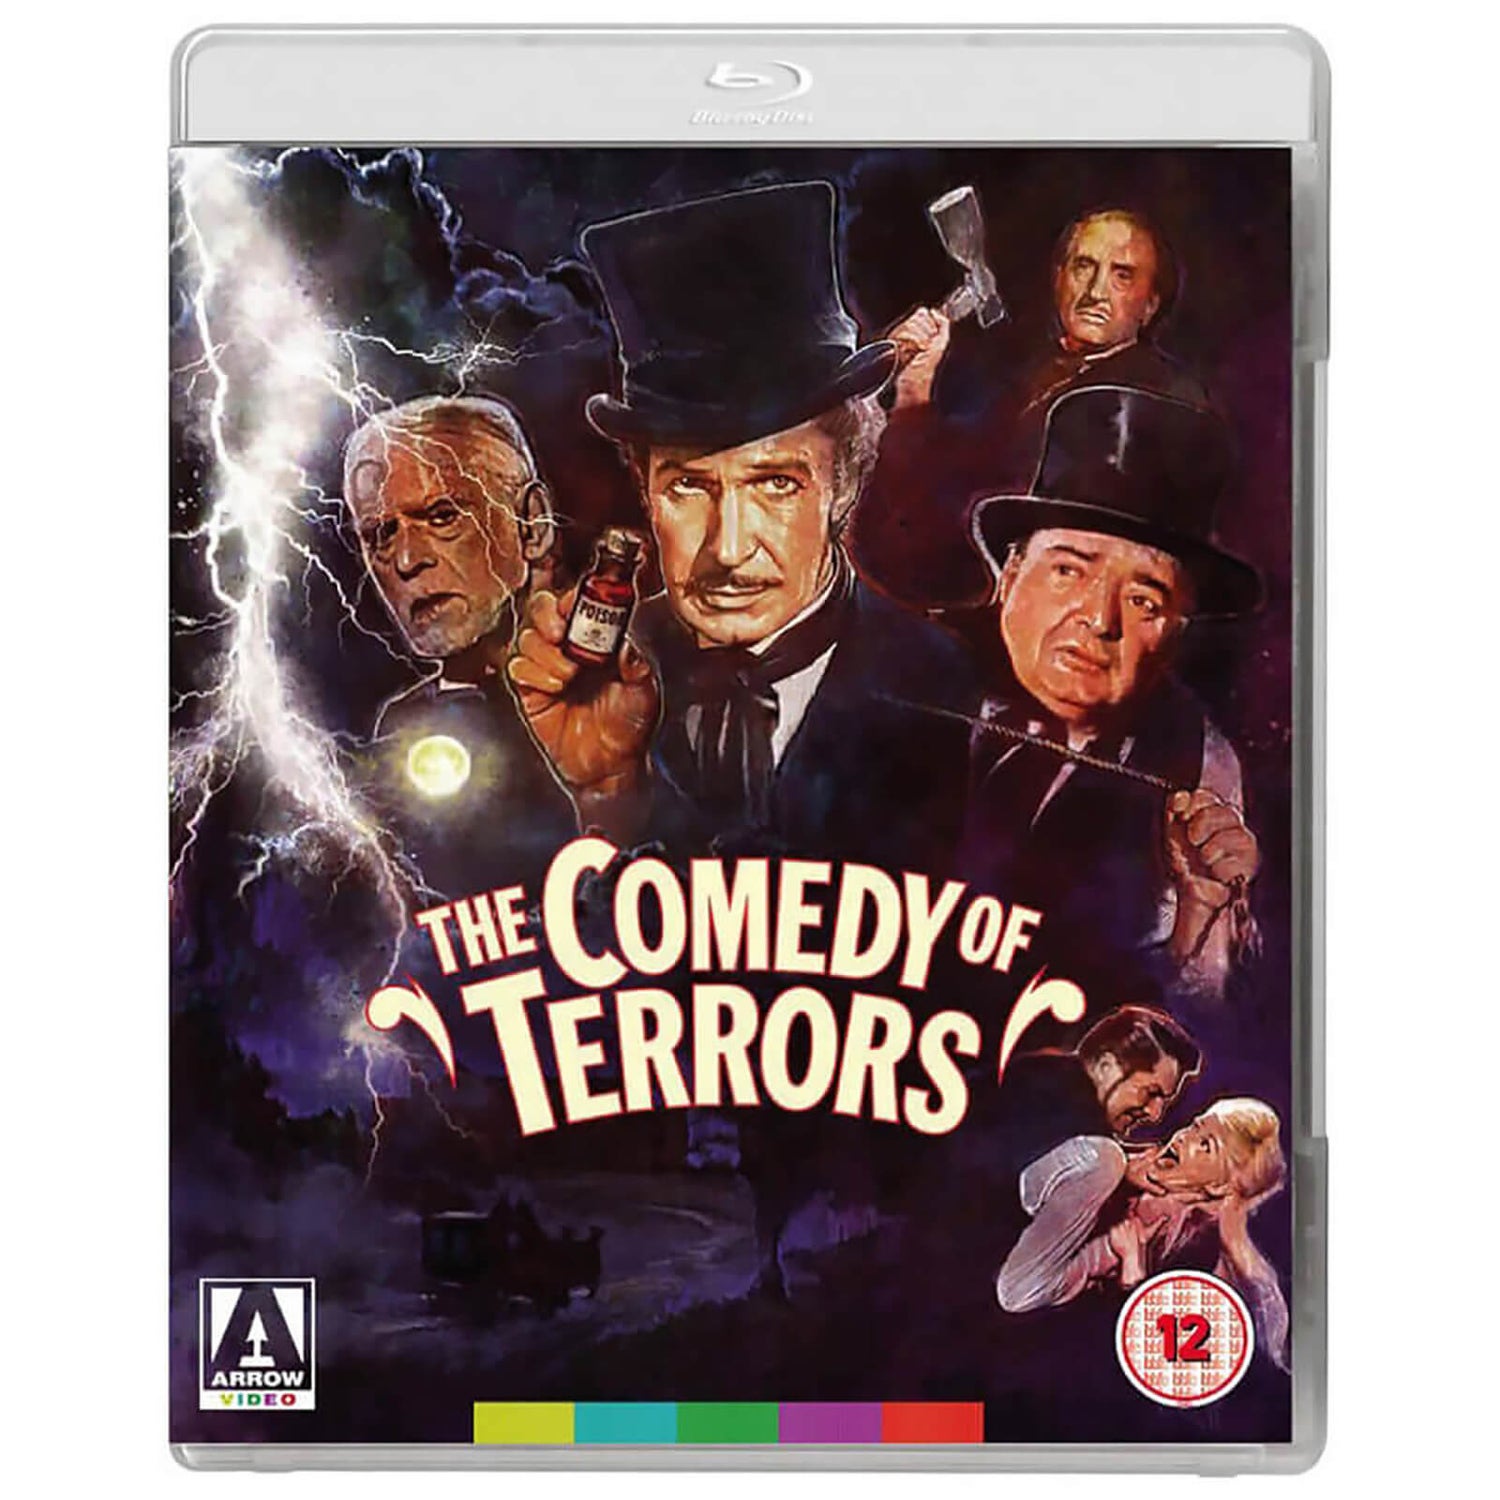 The Comedy Of Terrors Blu-ray